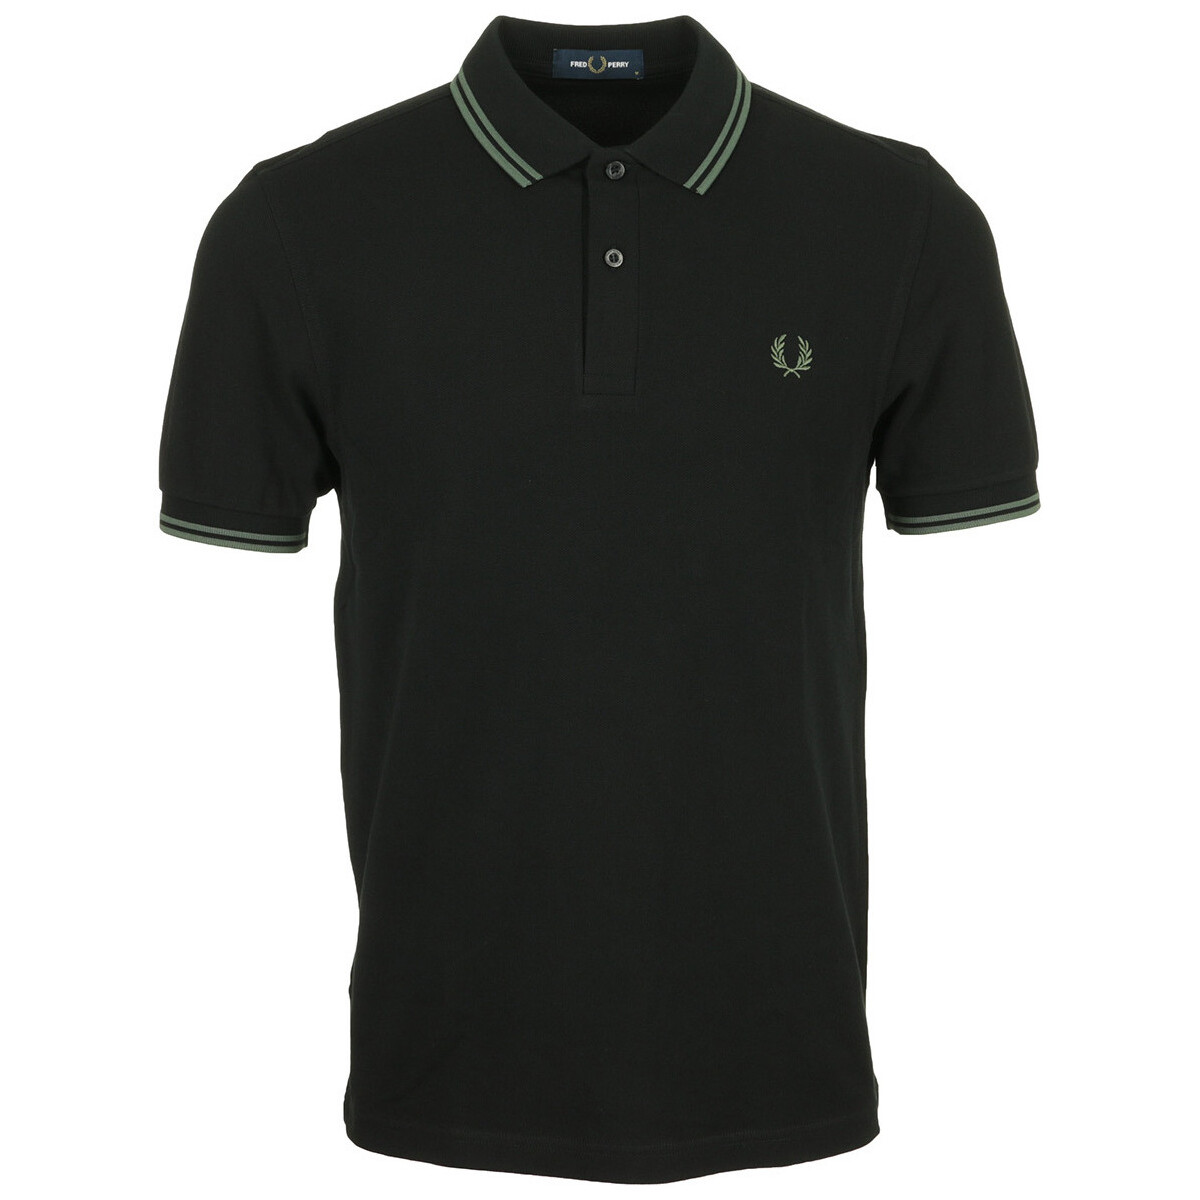 textil Hombre Tops y Camisetas Fred Perry Twin Tipped Negro